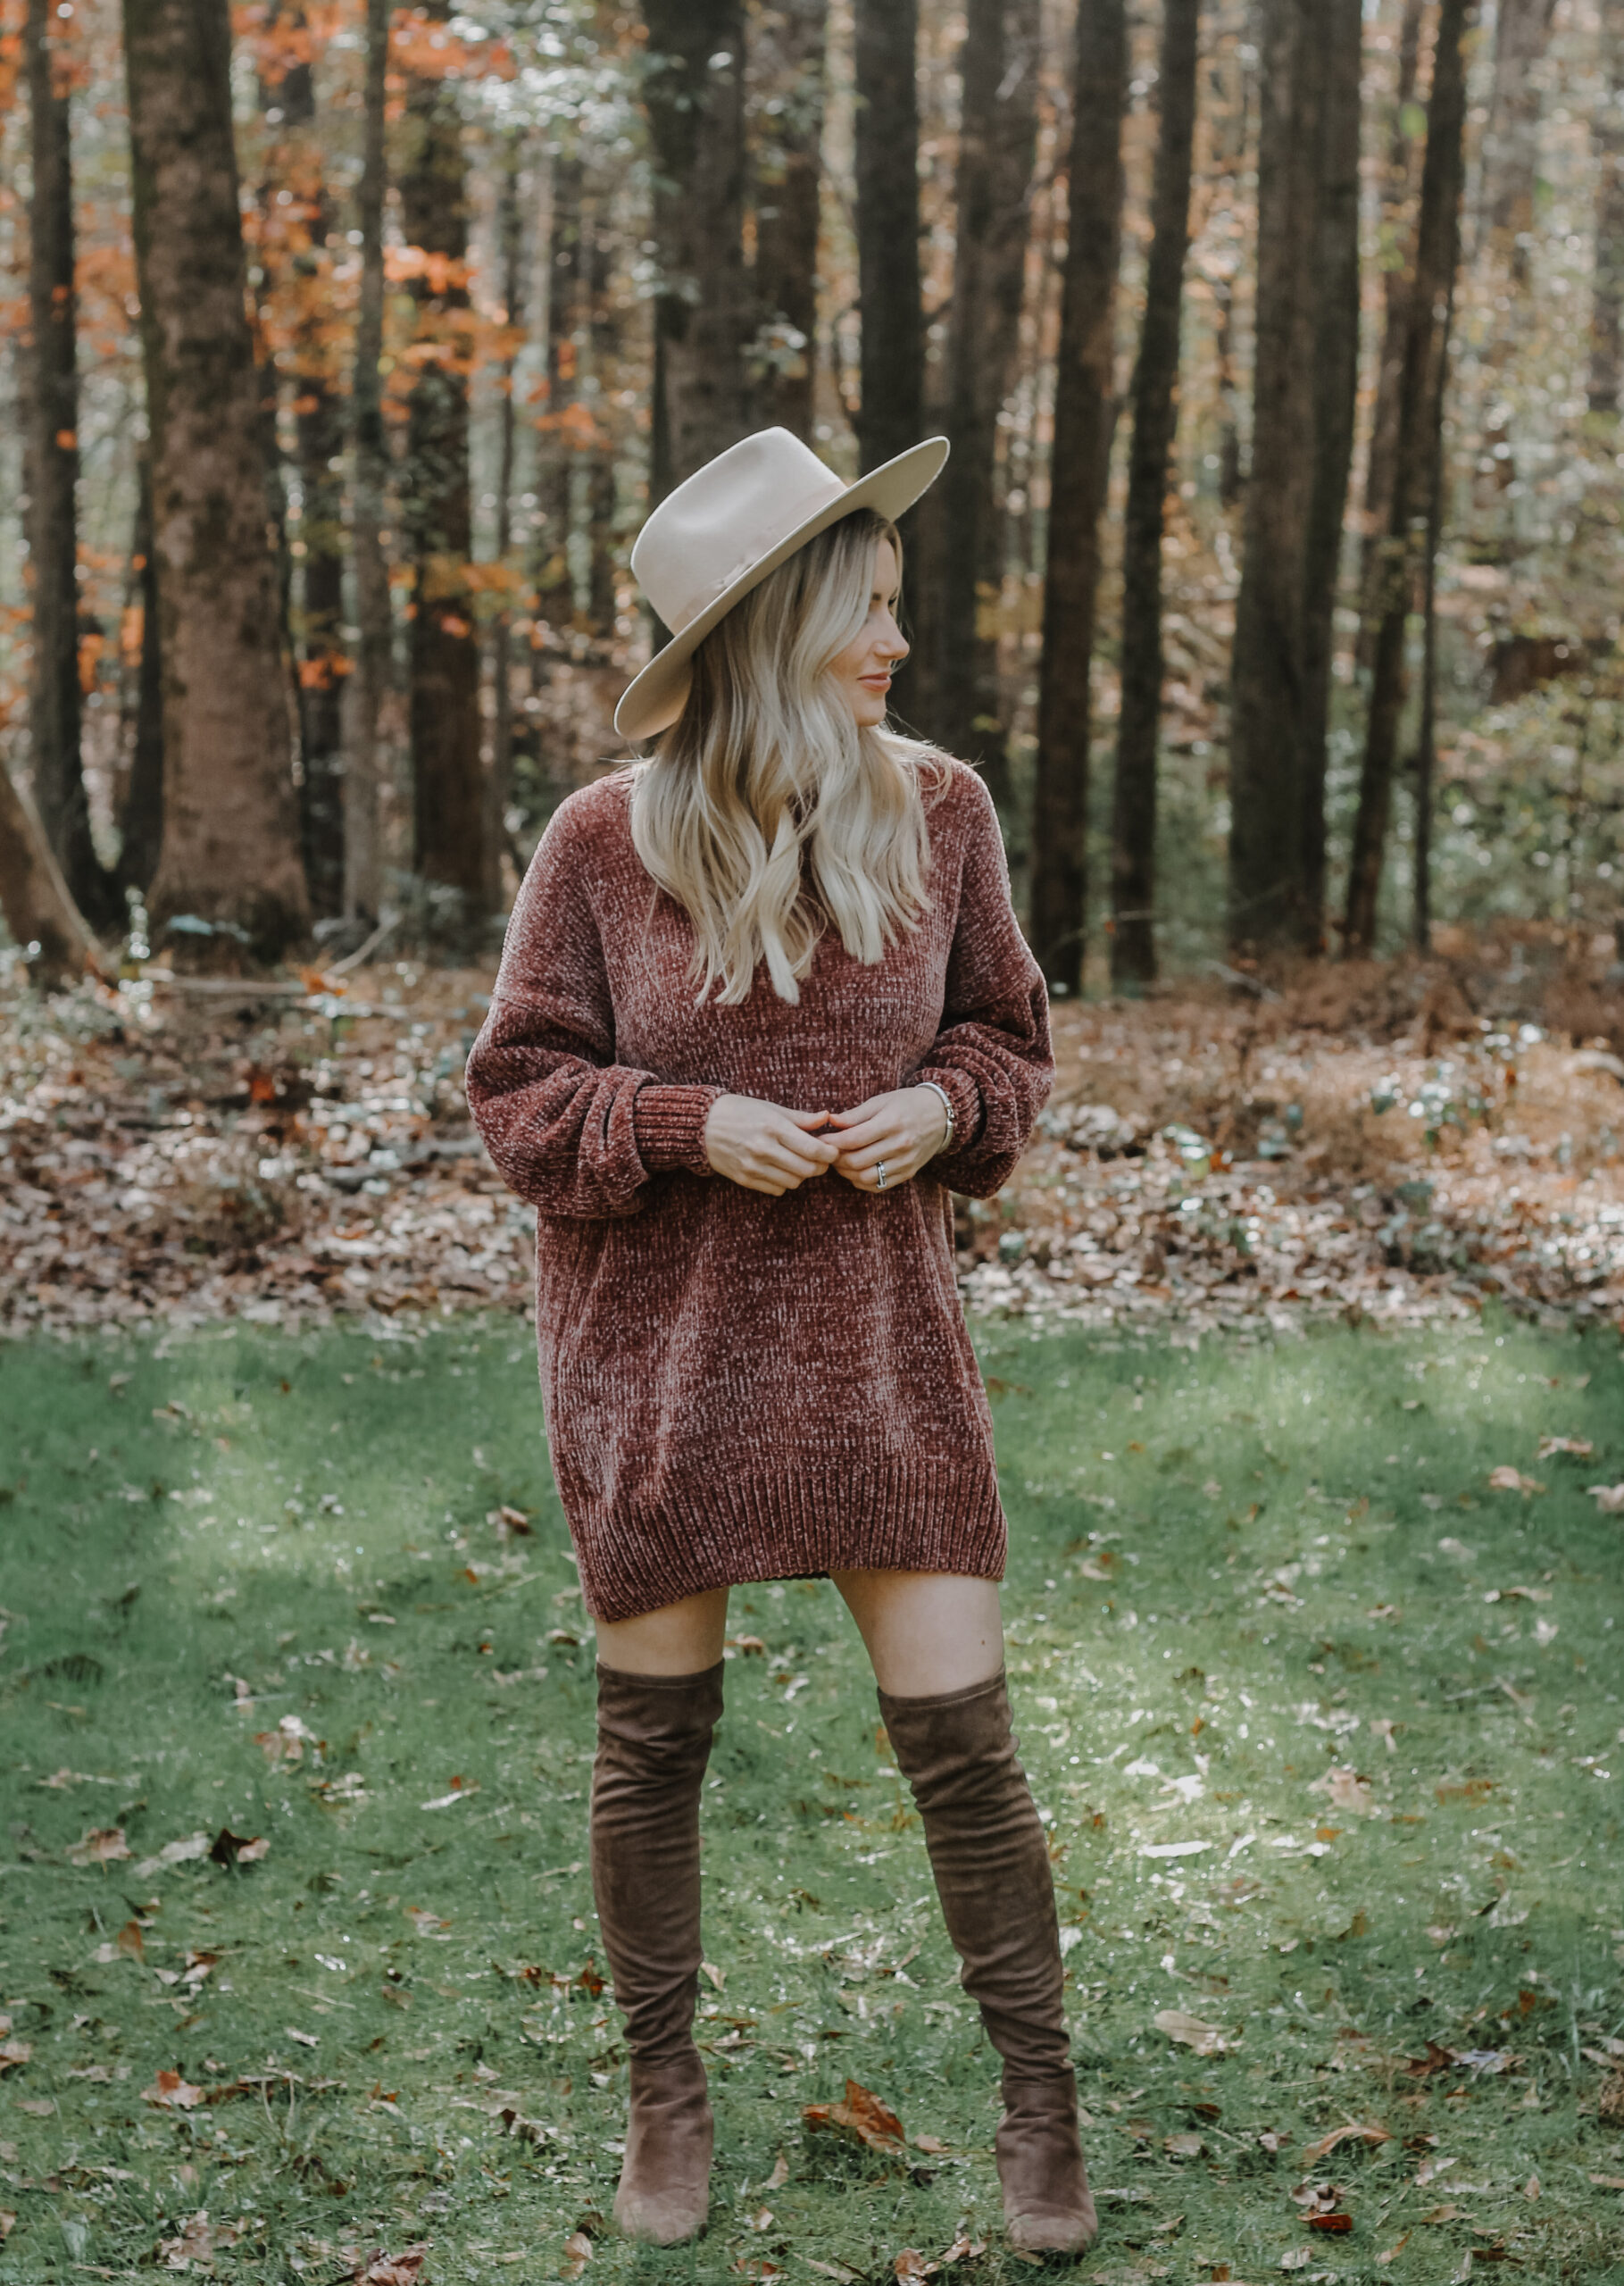 last minute thanksgiving outfit ideas